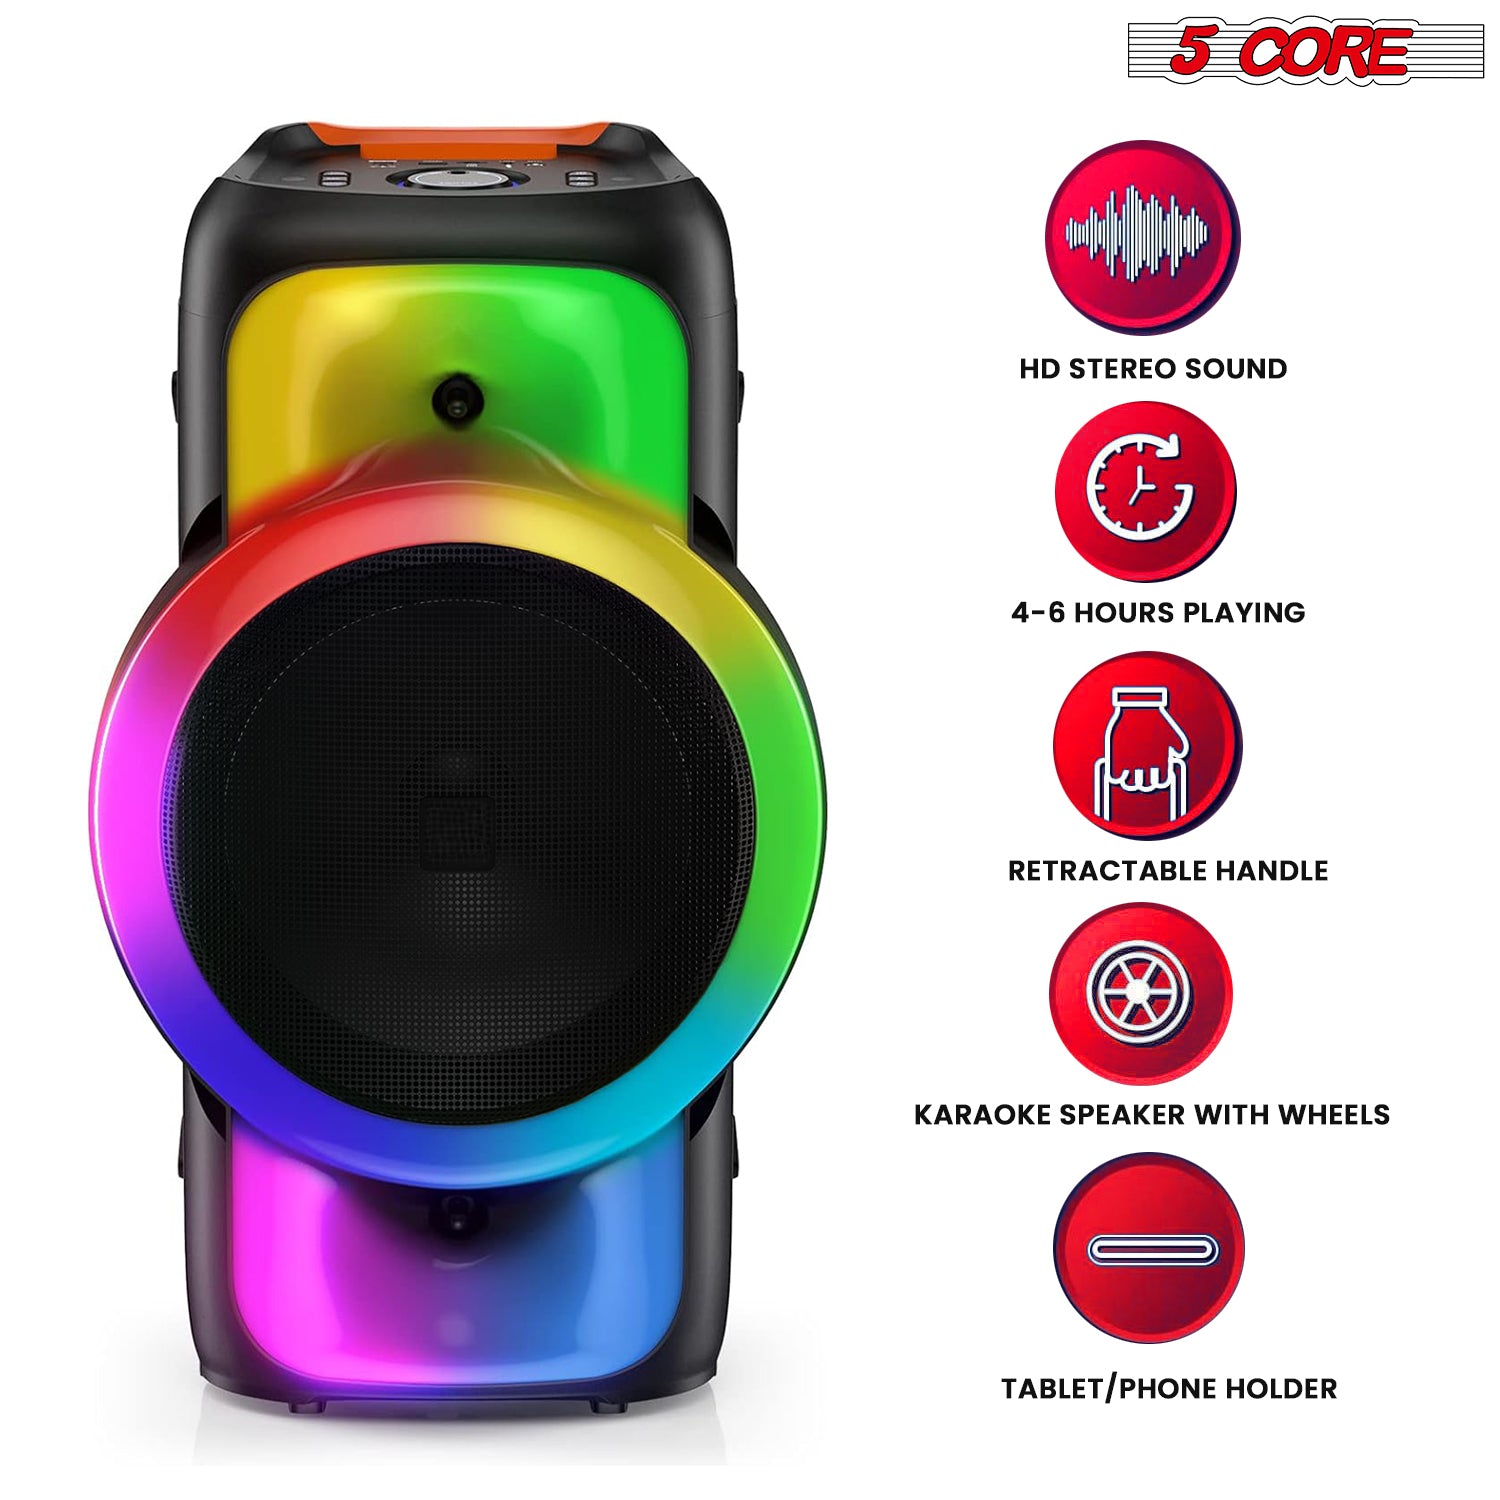 5 Core Bluetooth Speaker Karaoke Machine Portable Singing PA System w Cool DJ Light Support FM + TWS + USB + Memory Card+ AUX + REC Party Speakers Includes Two Wireless Mics -PLB 12X1 2MIC